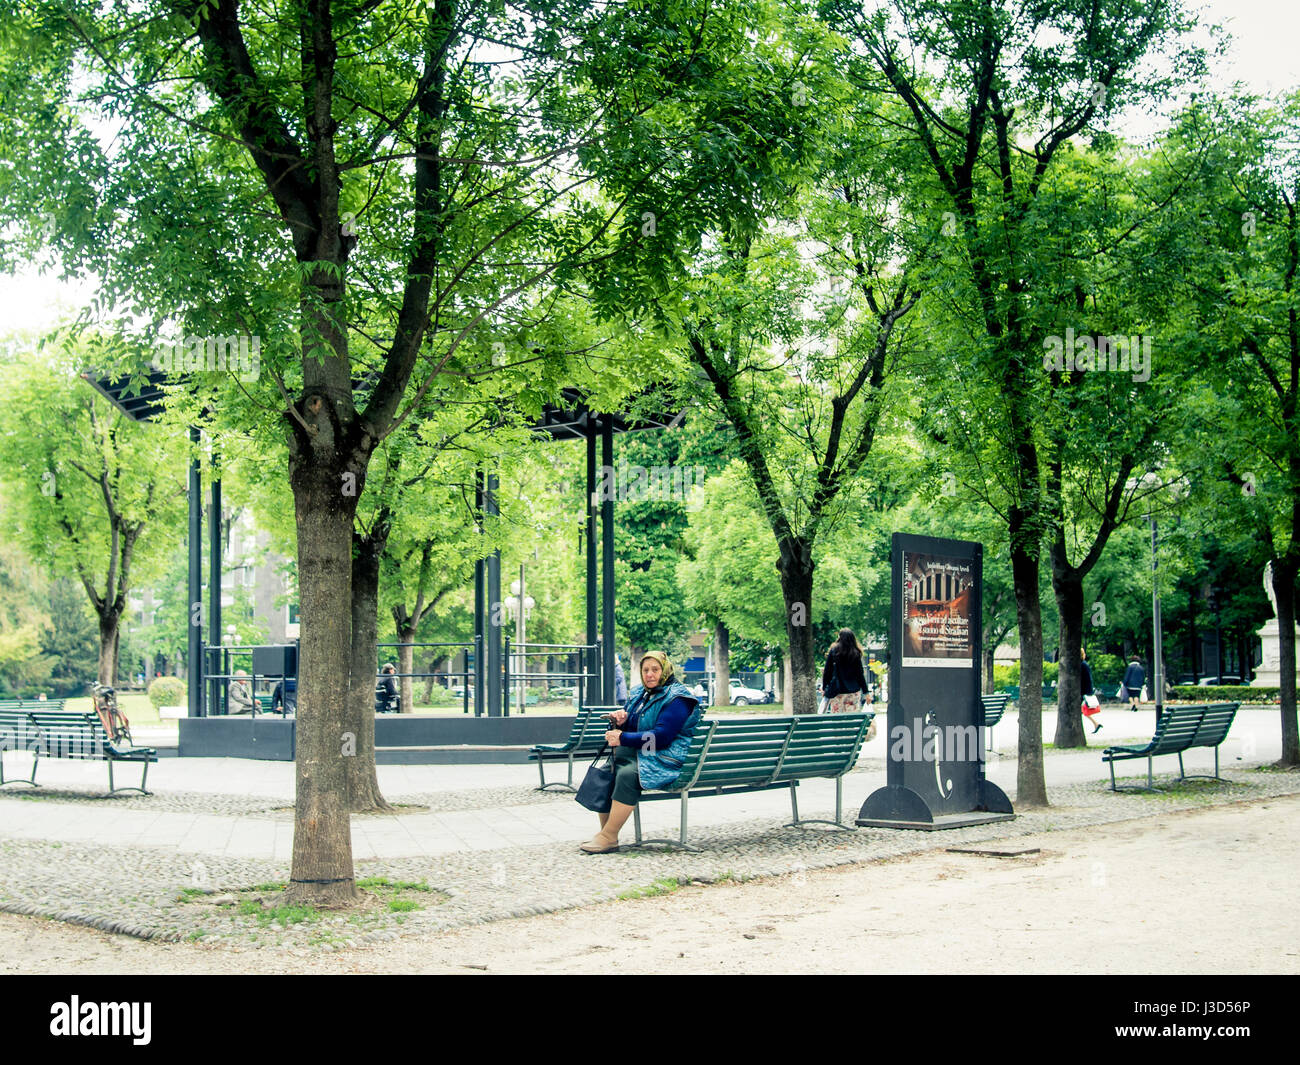 Old lady east europe immigrant seated on a bench in a public square Stock Photo